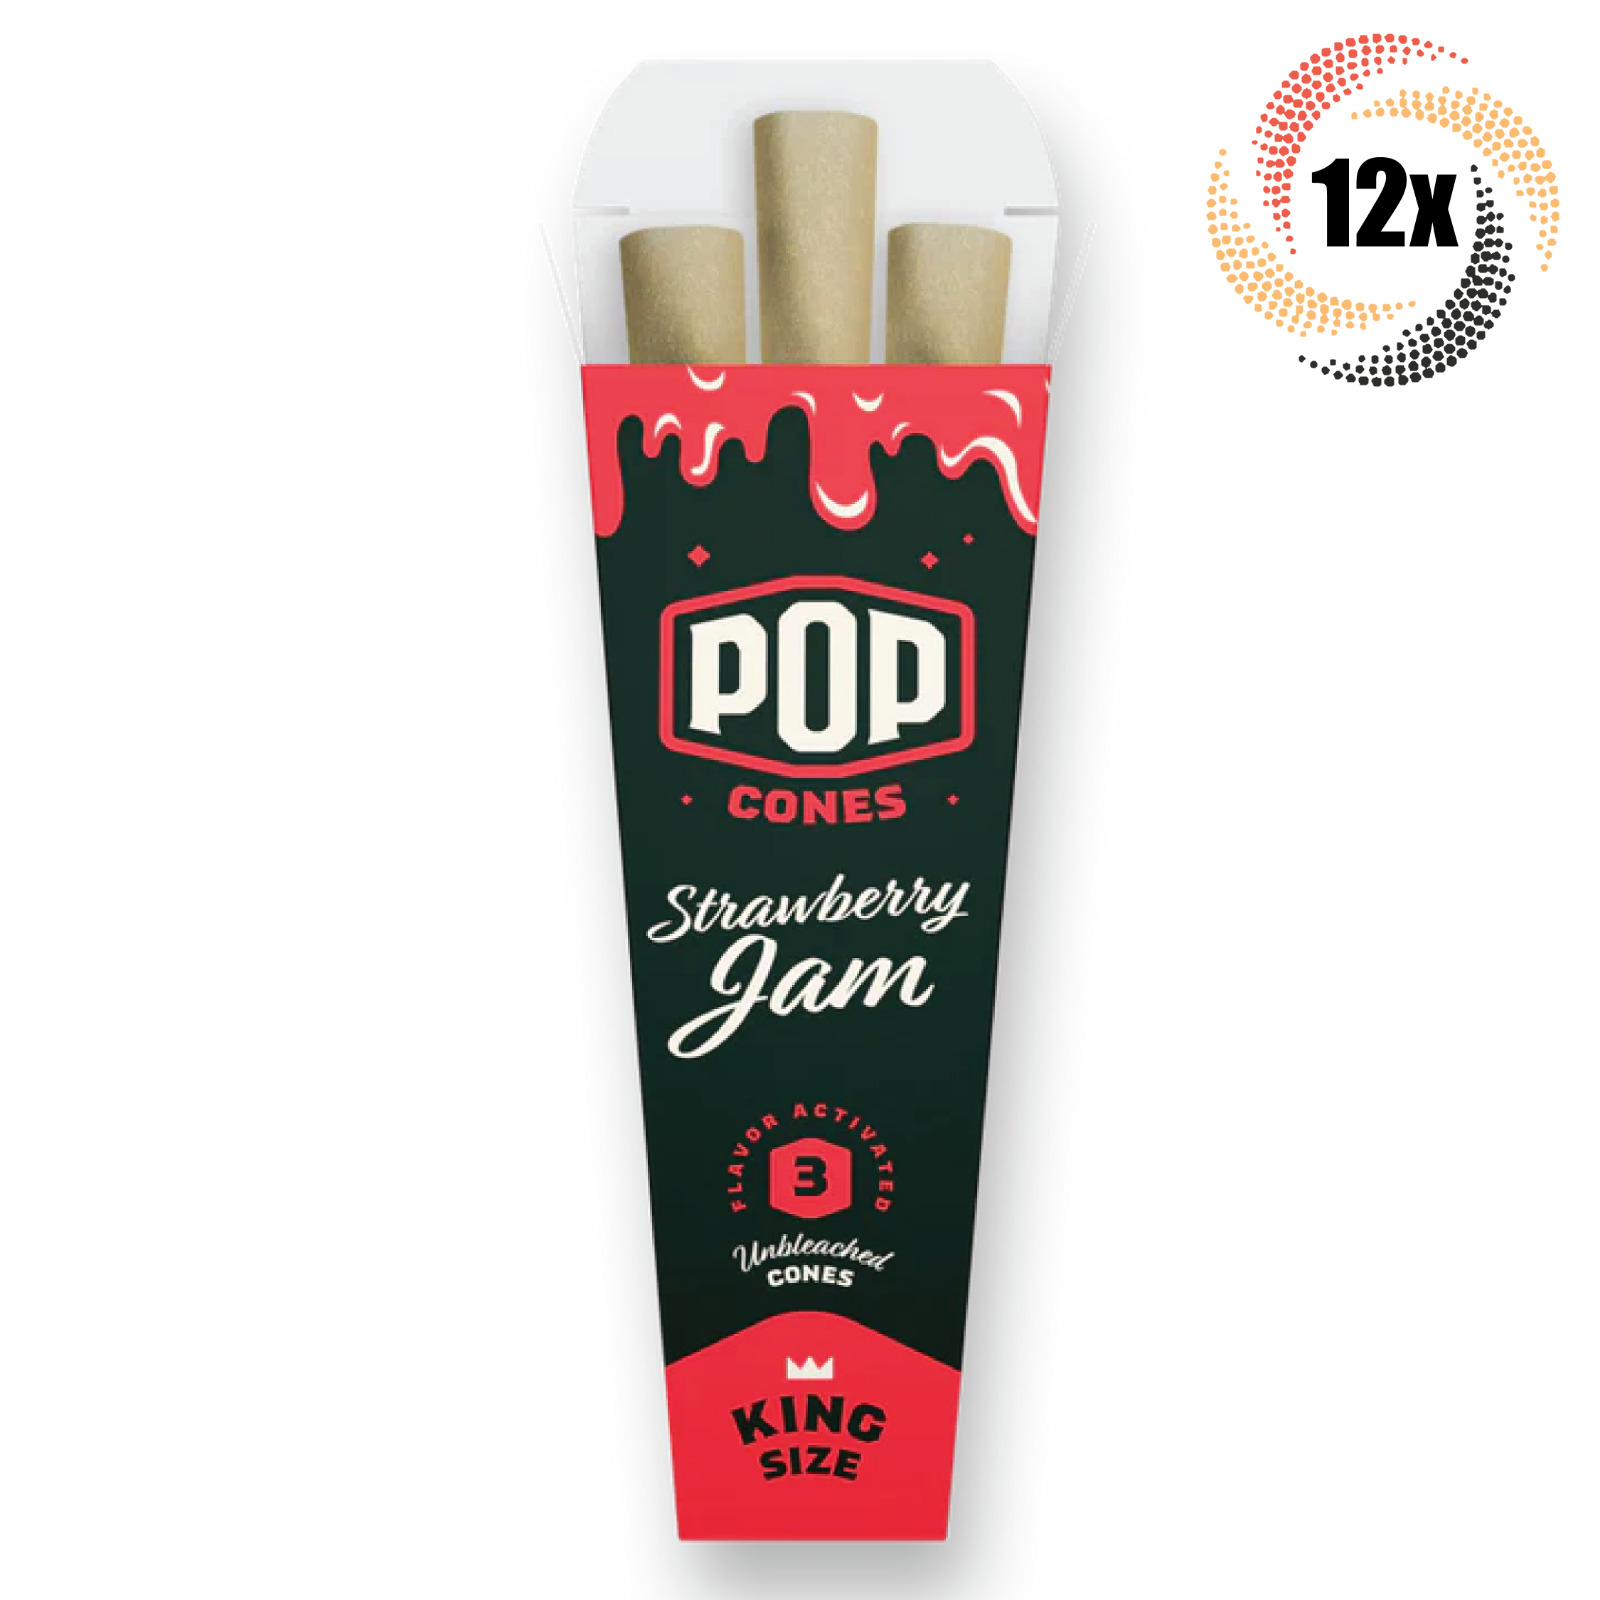 12x Packs Pop Strawberry Jam Cones | 3 Cones Each | King Size | + 2 Free Tubes